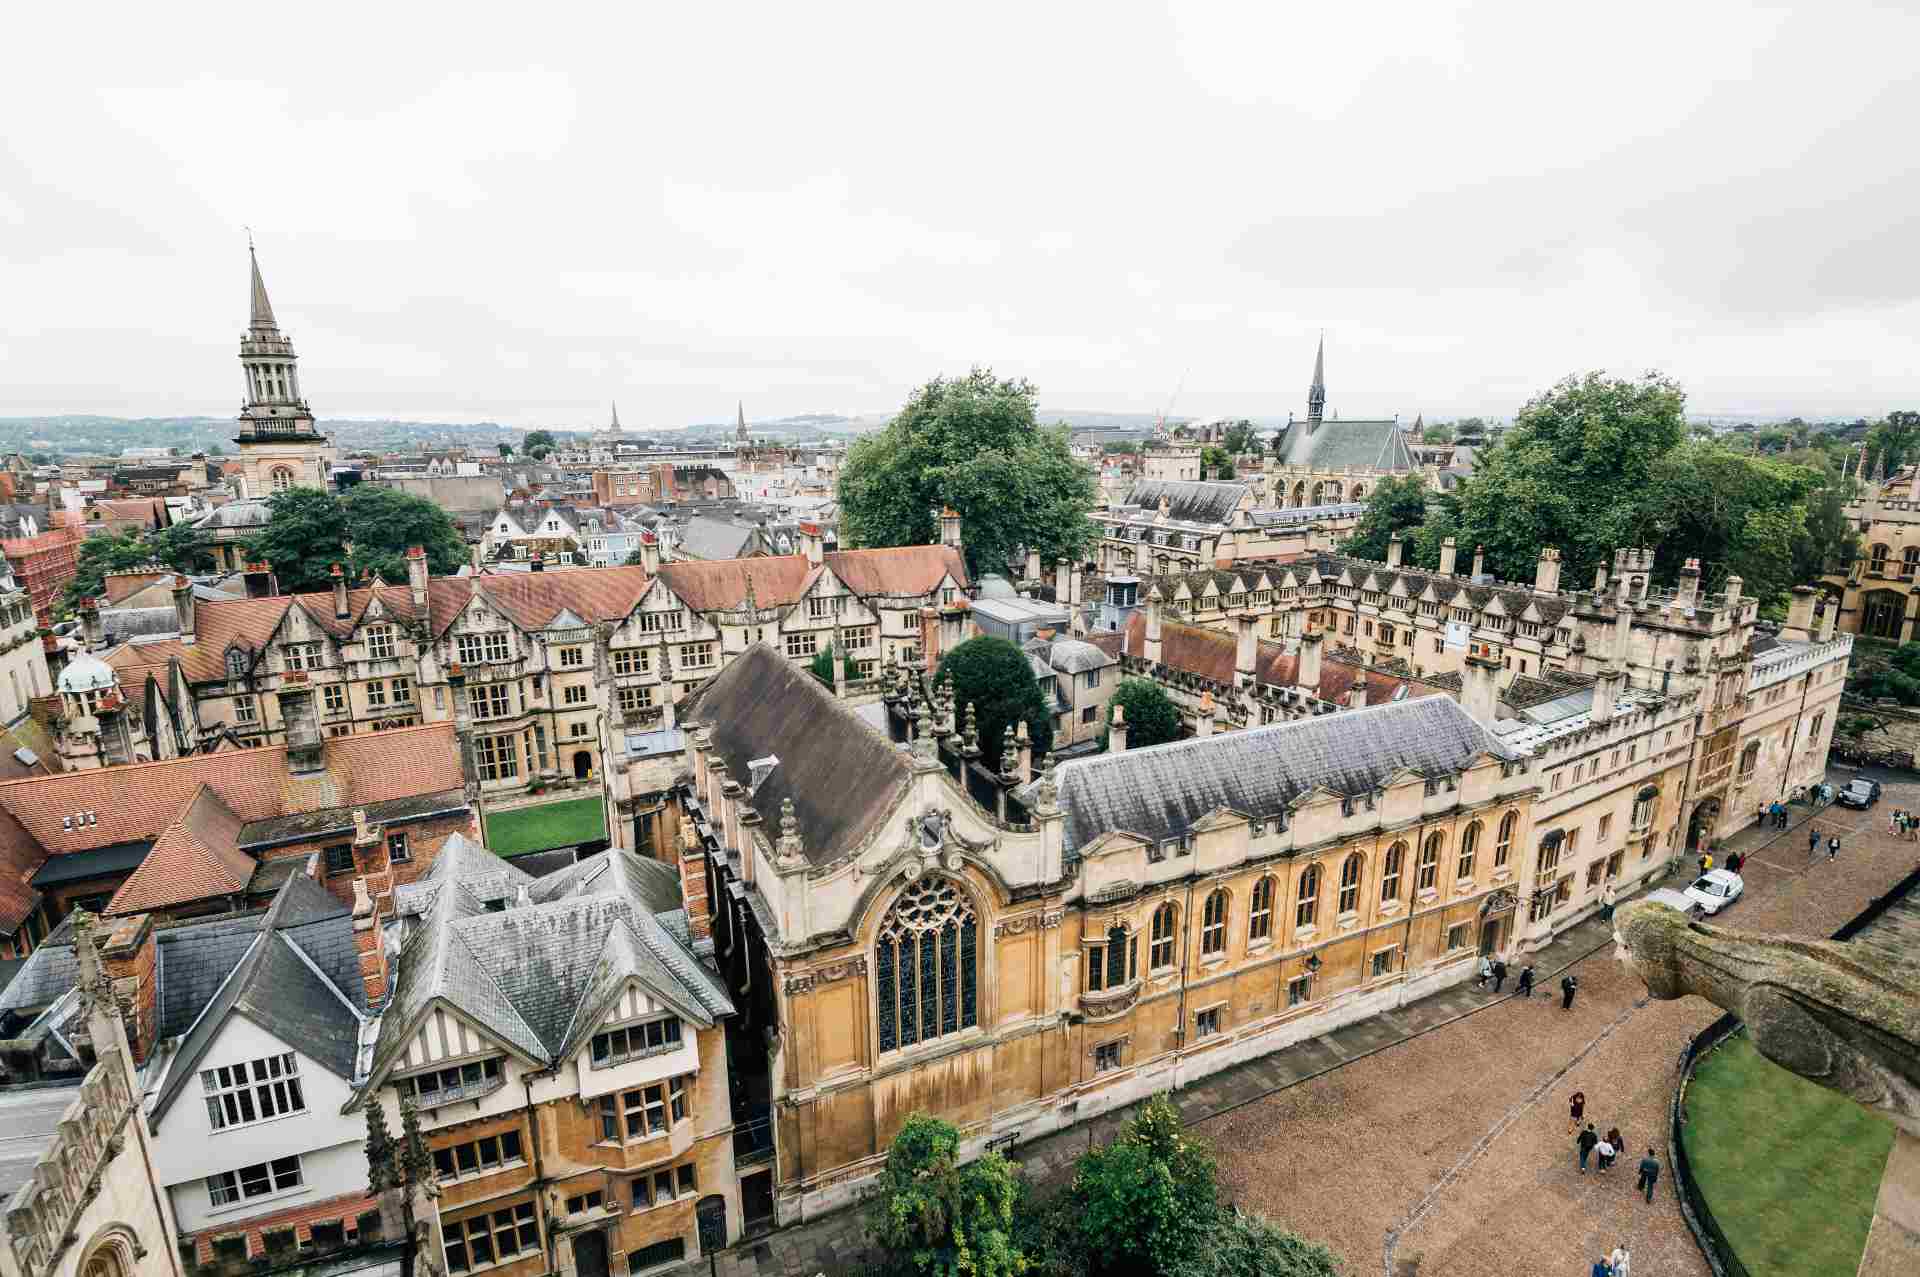 High level view of Oxford where a new EV charging pilot is taking place